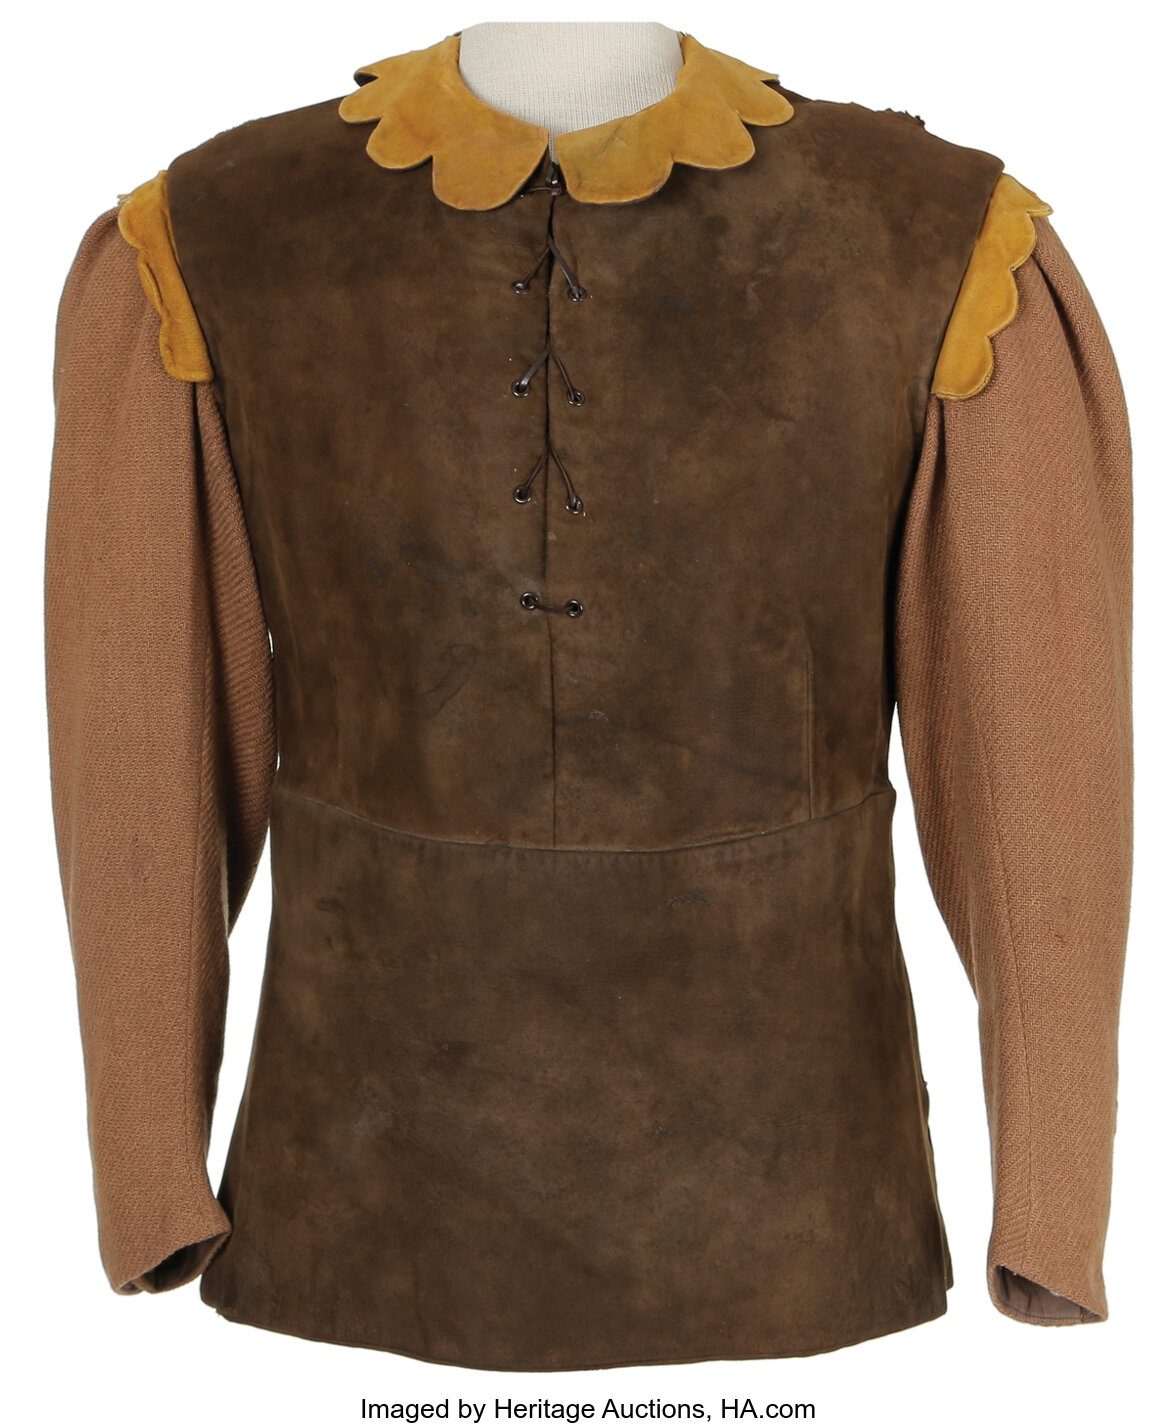 Moe Howard Suede Tunic From Snow White And The Three Stooges Lot 1910 Heritage Auctions